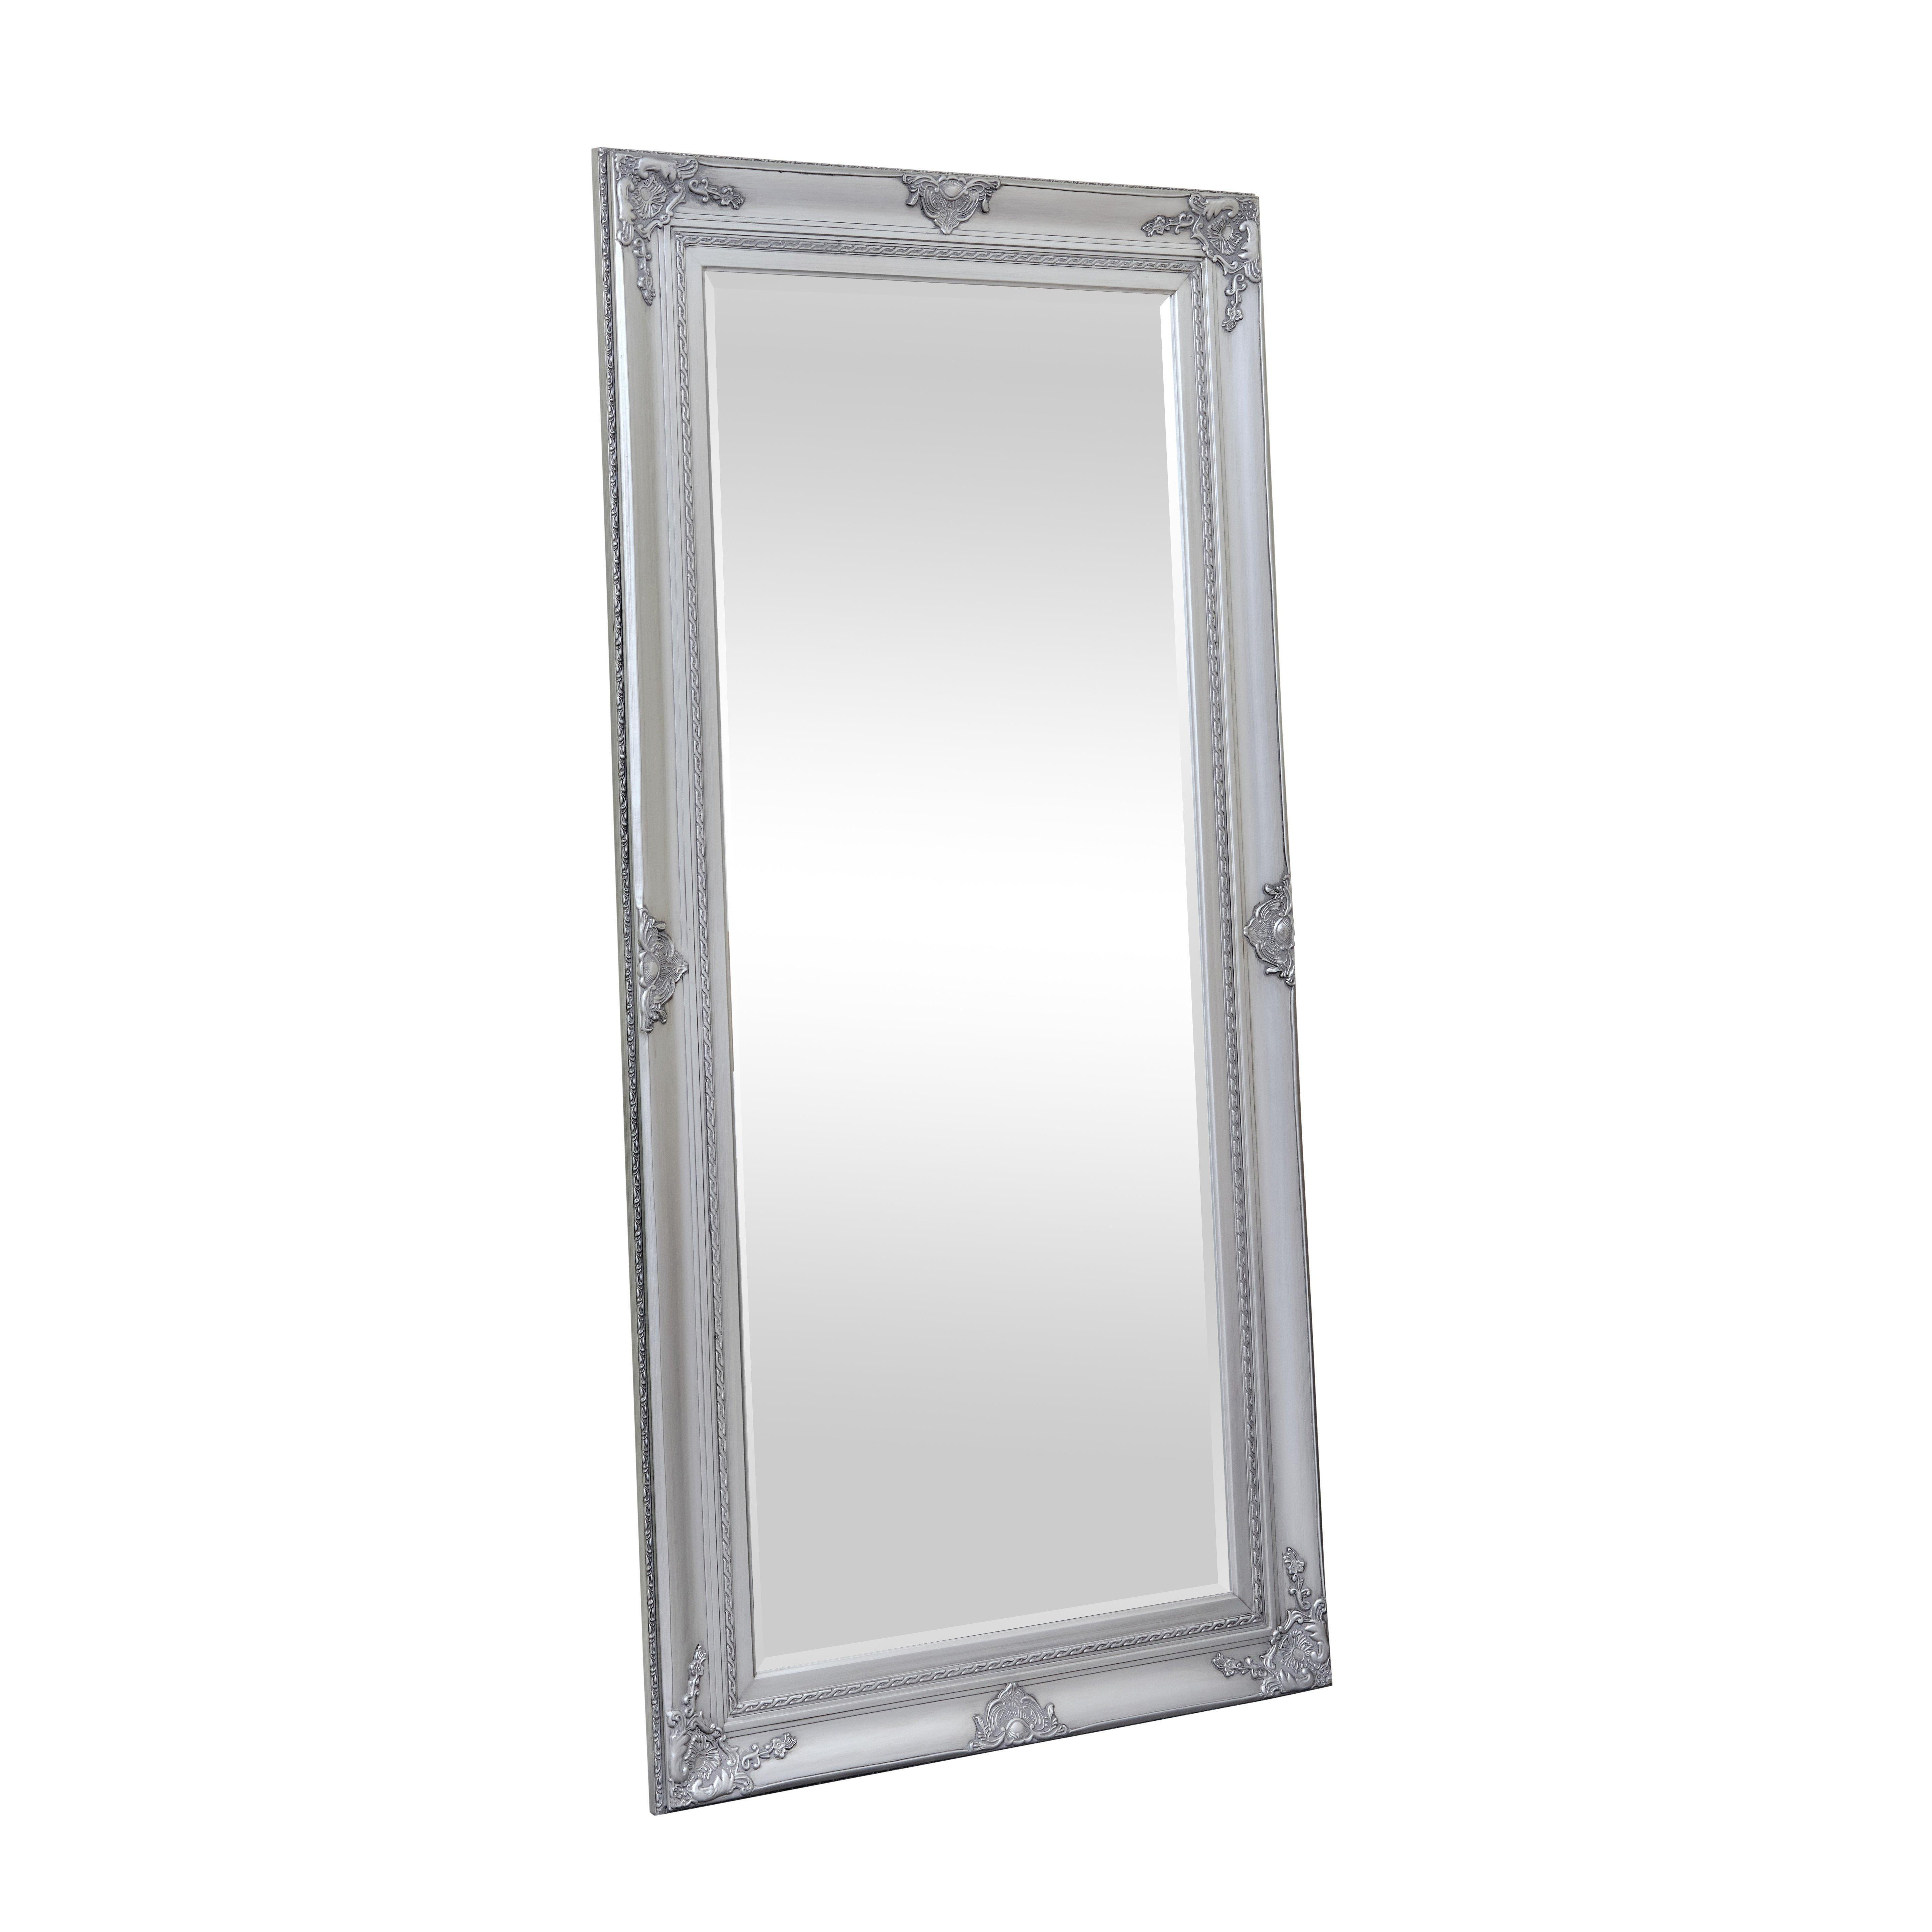 Extra Large Ornate Silver Wall/Leaner Mirror 100cm X 200cm - image 1